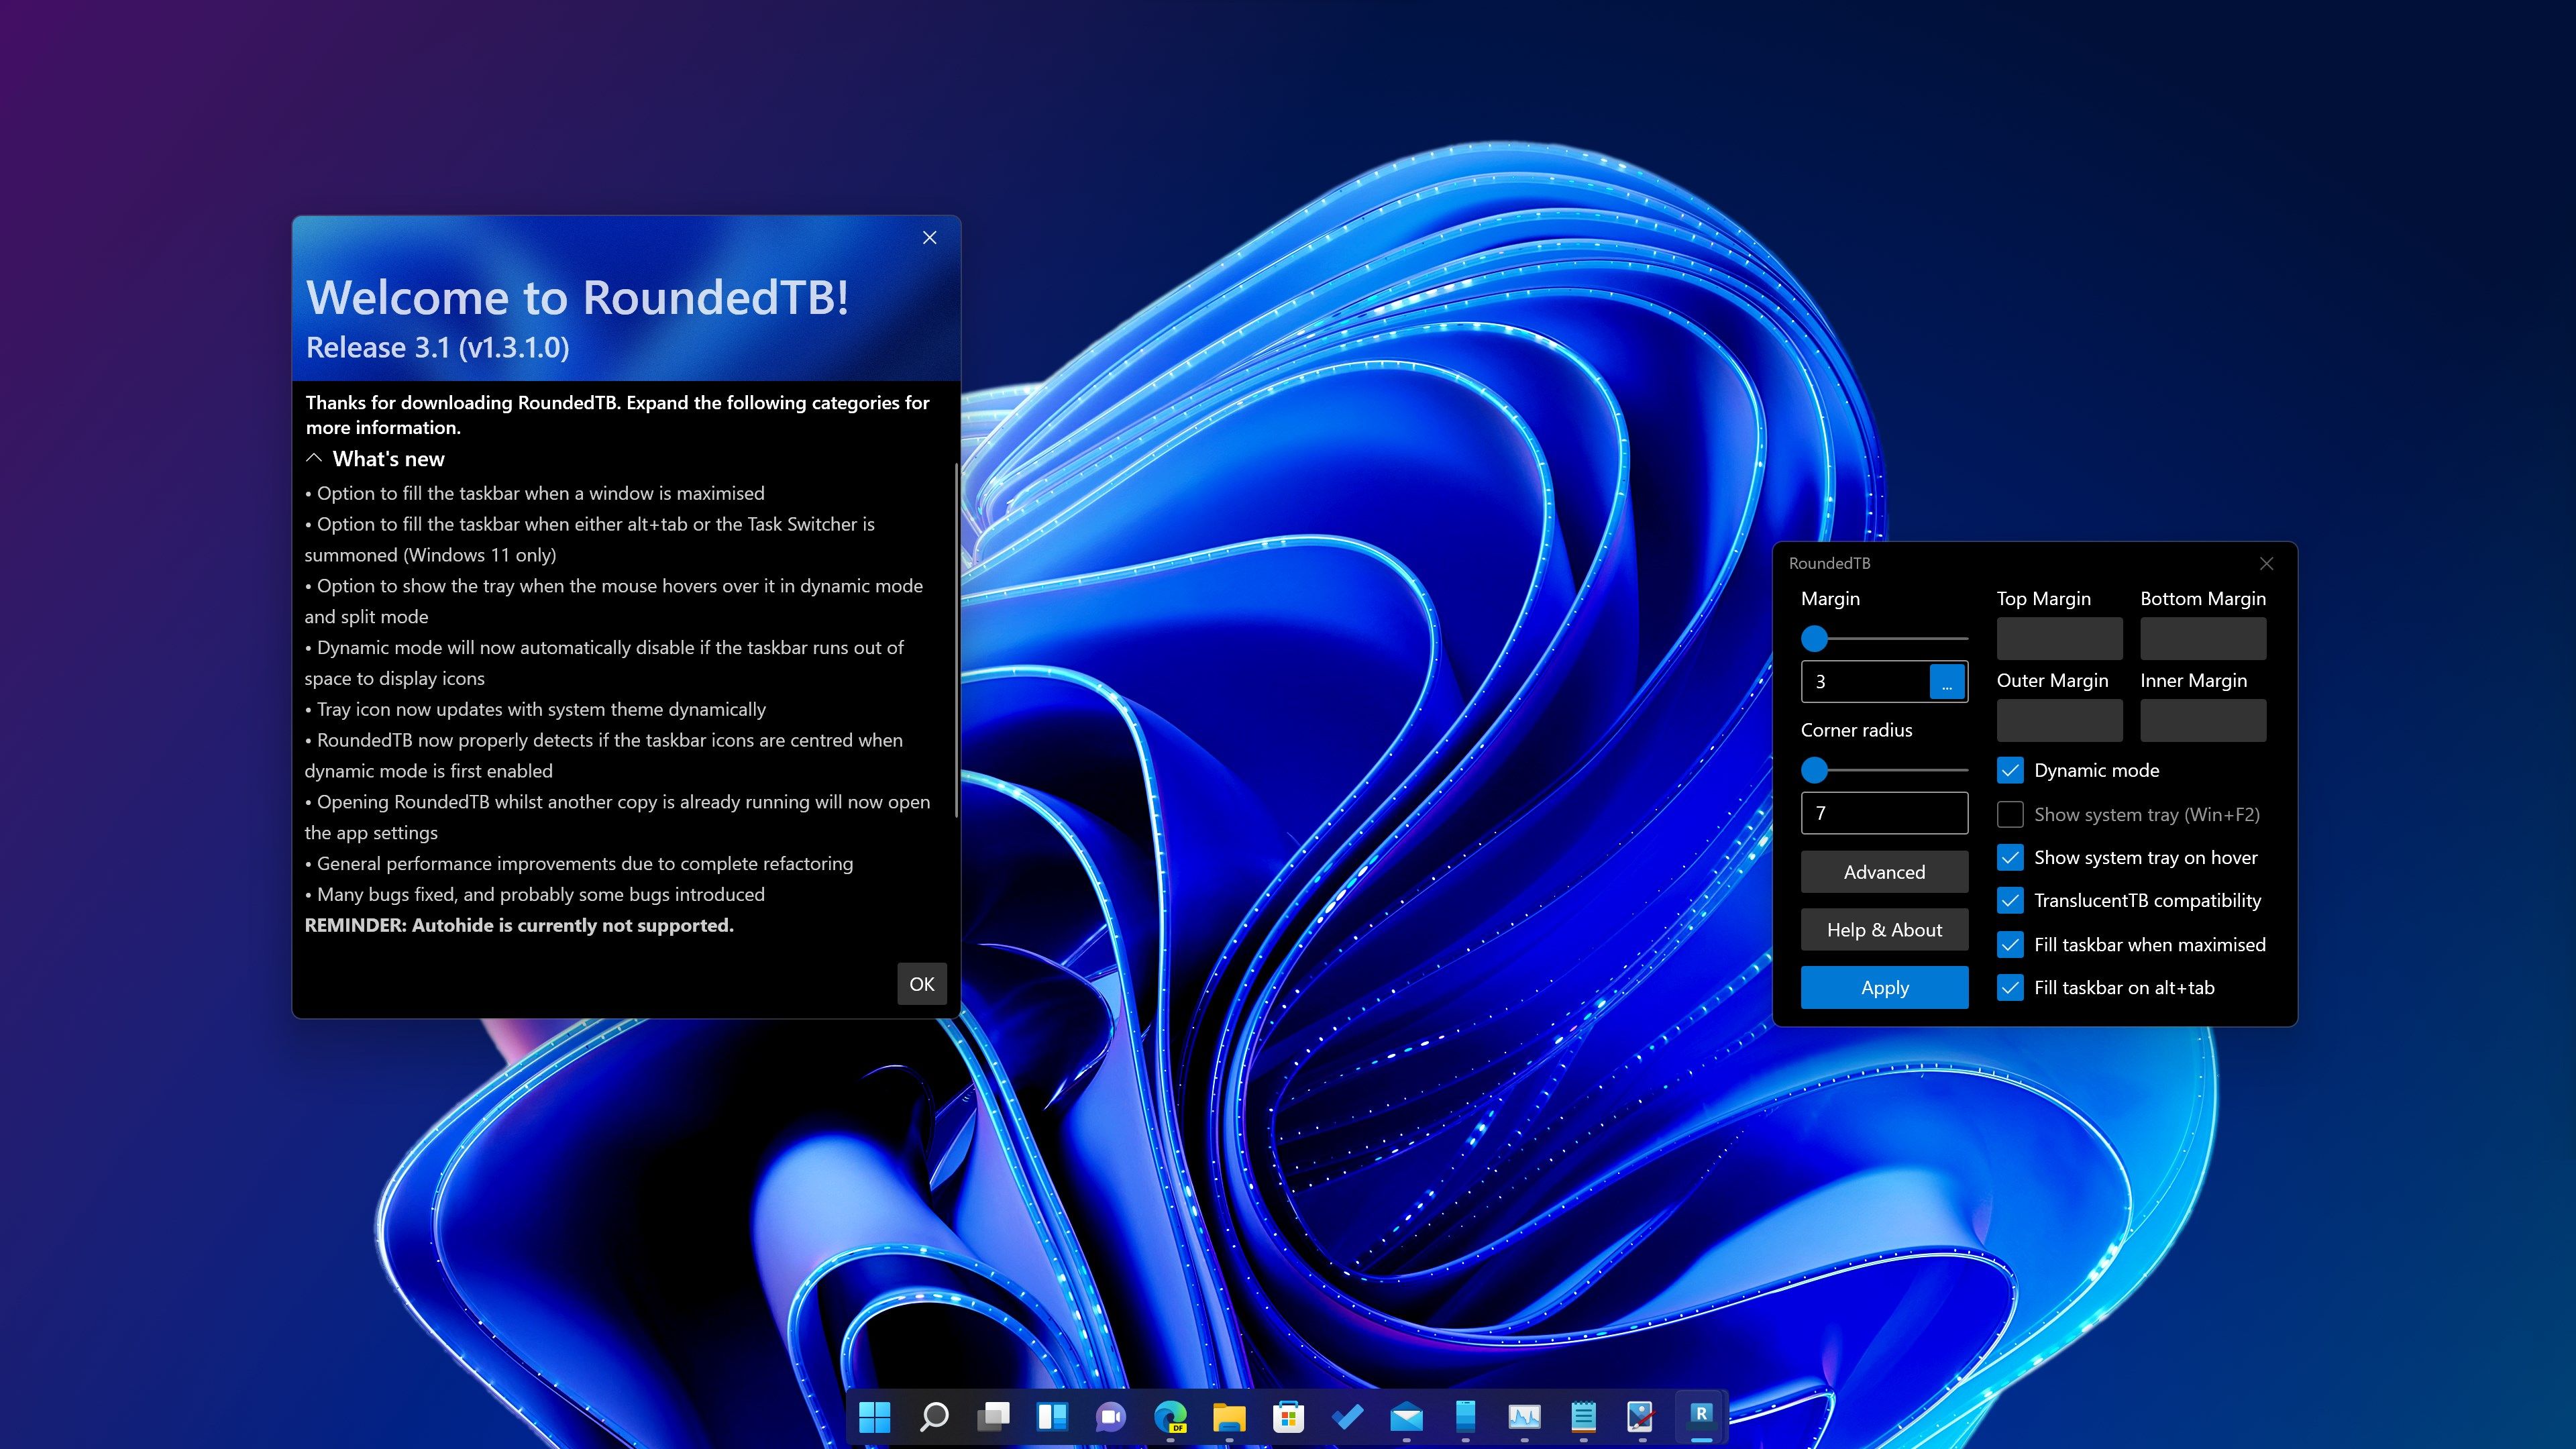 Desktop with a rounded centred taskbar and the RoundedTB UI and About screen visible.